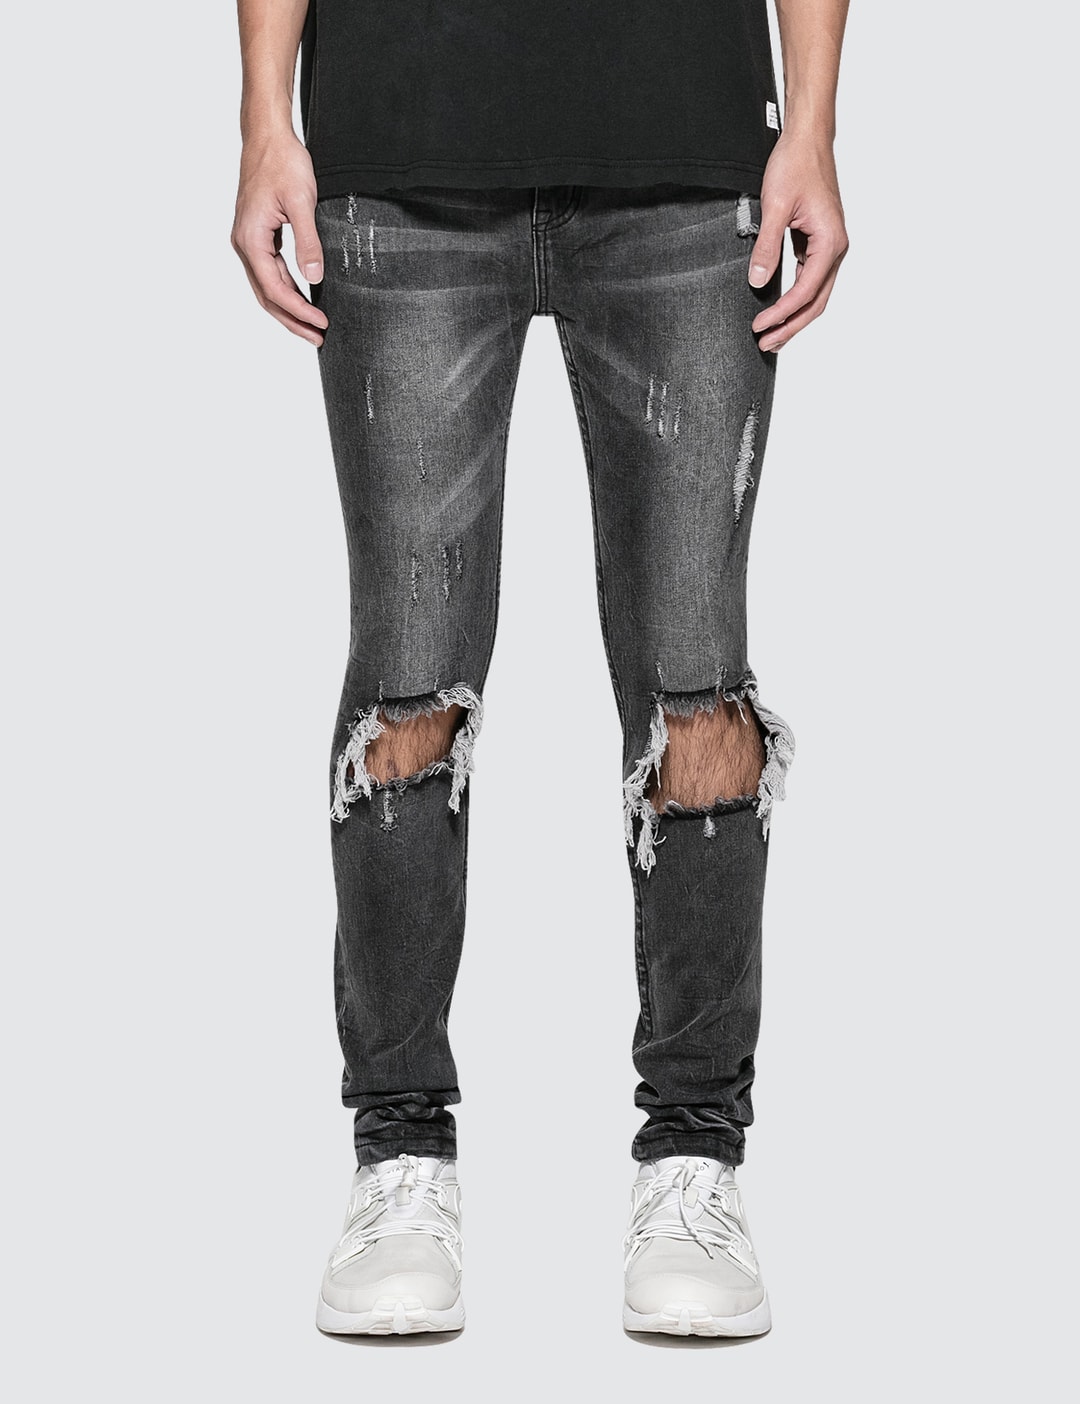 Stampd - 101 Denim Jeans | HBX - Globally Curated Fashion and Lifestyle ...